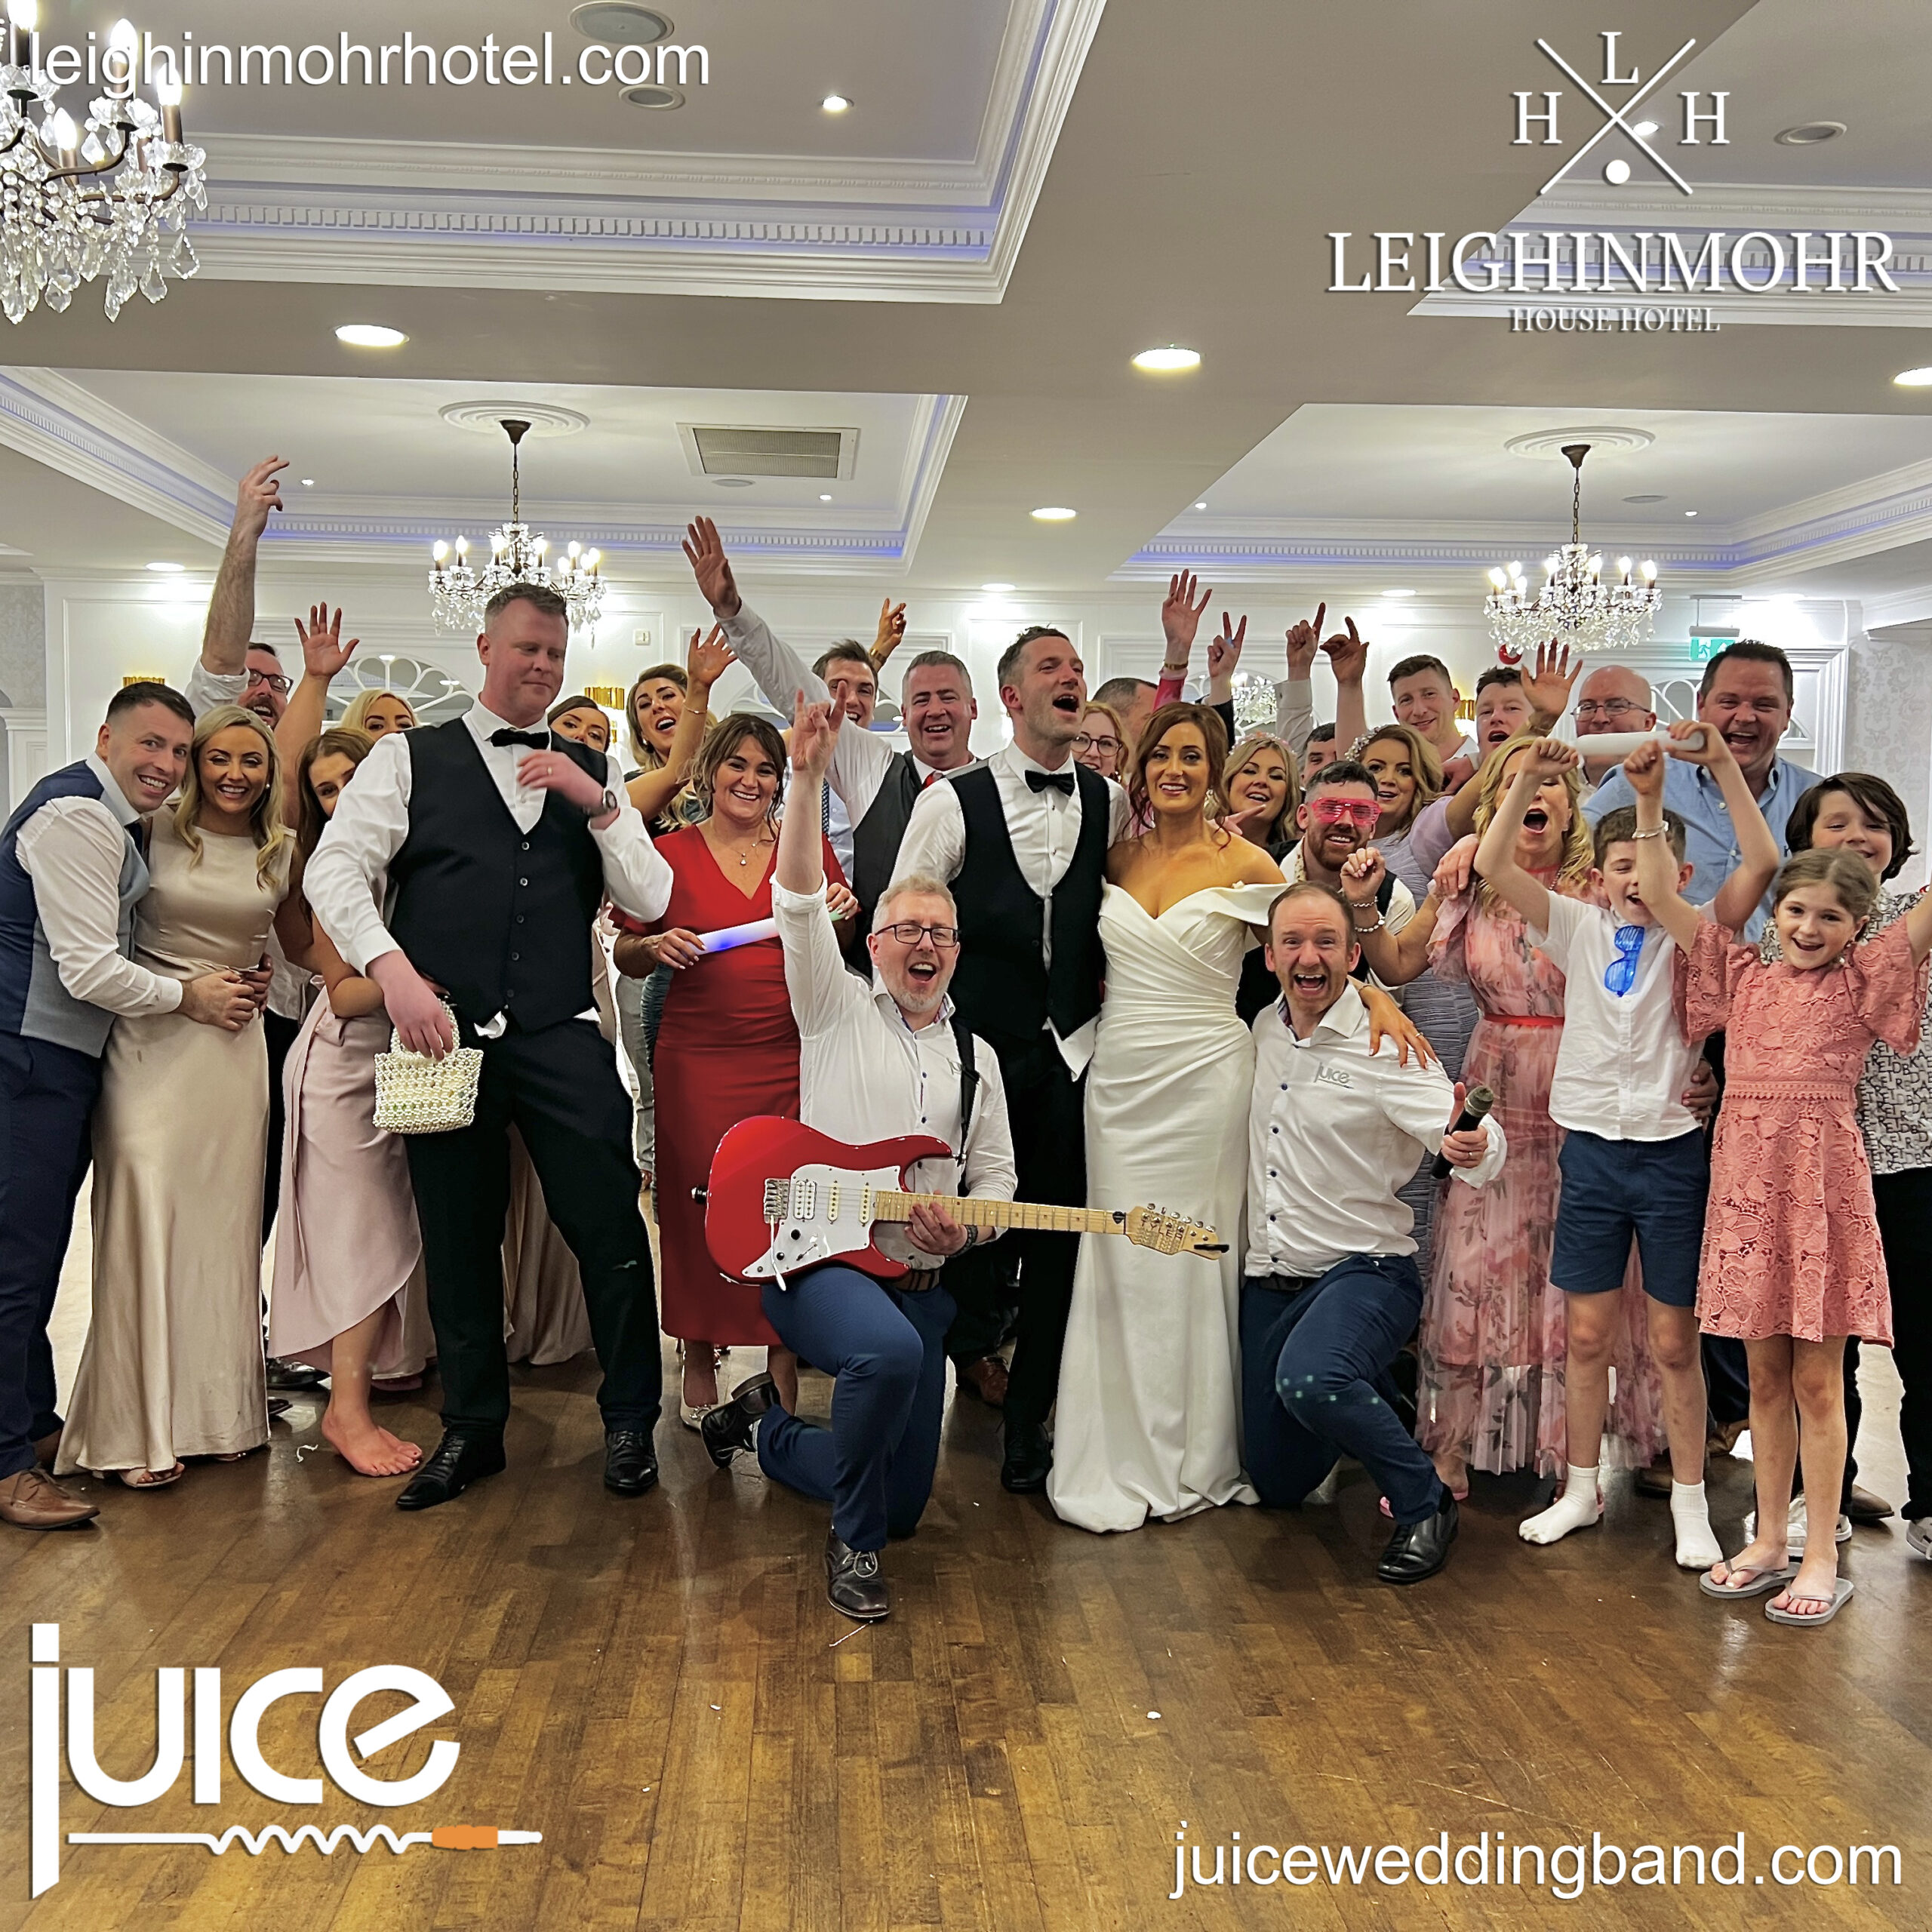 Photo of Shauna and Sean's wedding guests with Rod and Neil from Juice Wedding Band Northern Ireland